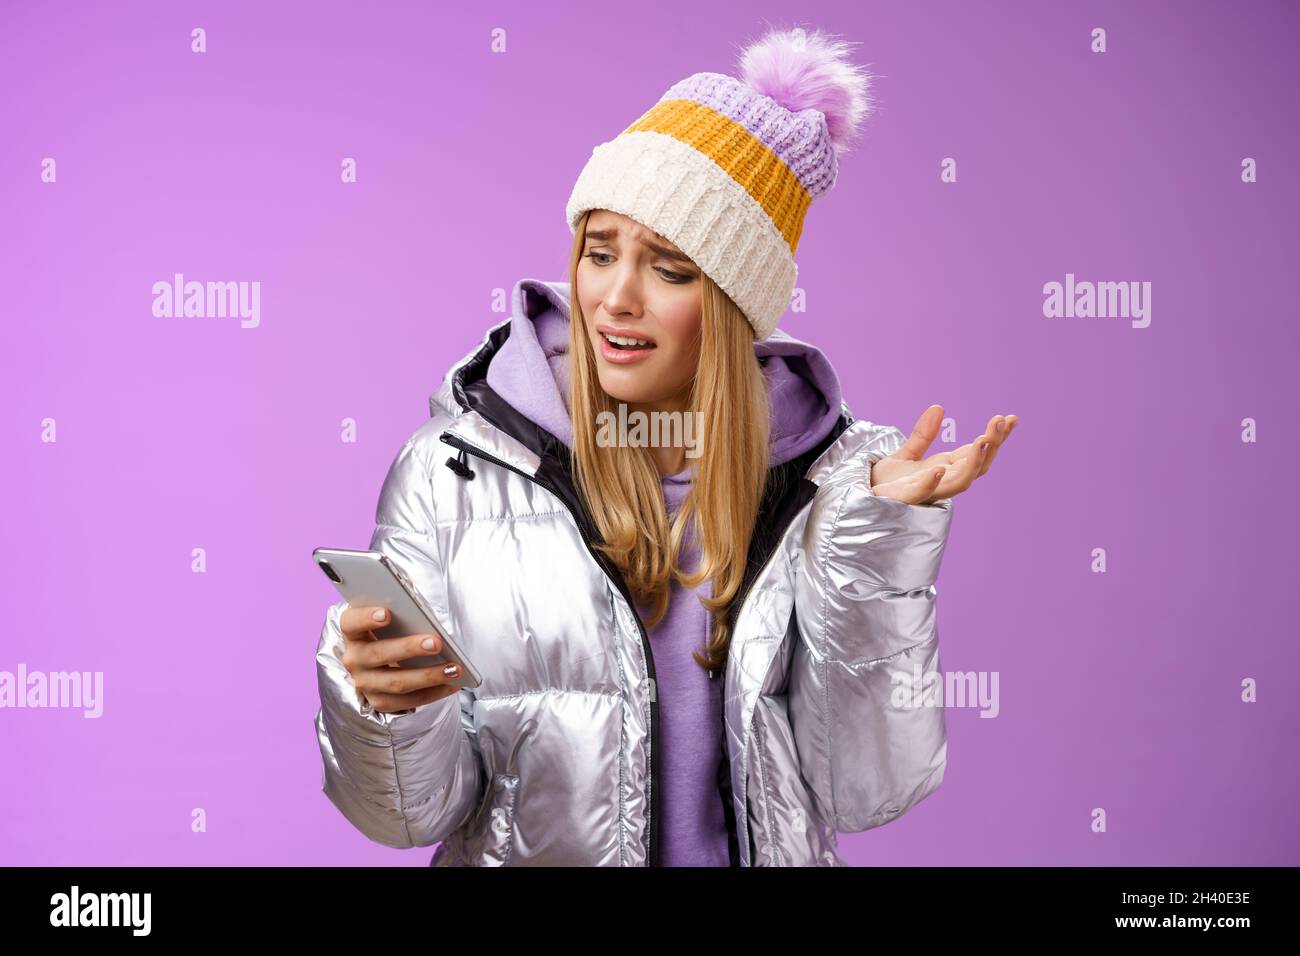 Upset disappointed attractive whining gloomy blond girl in silver jacket standing outside hat holding smartphone shrugging raisi Stock Photo